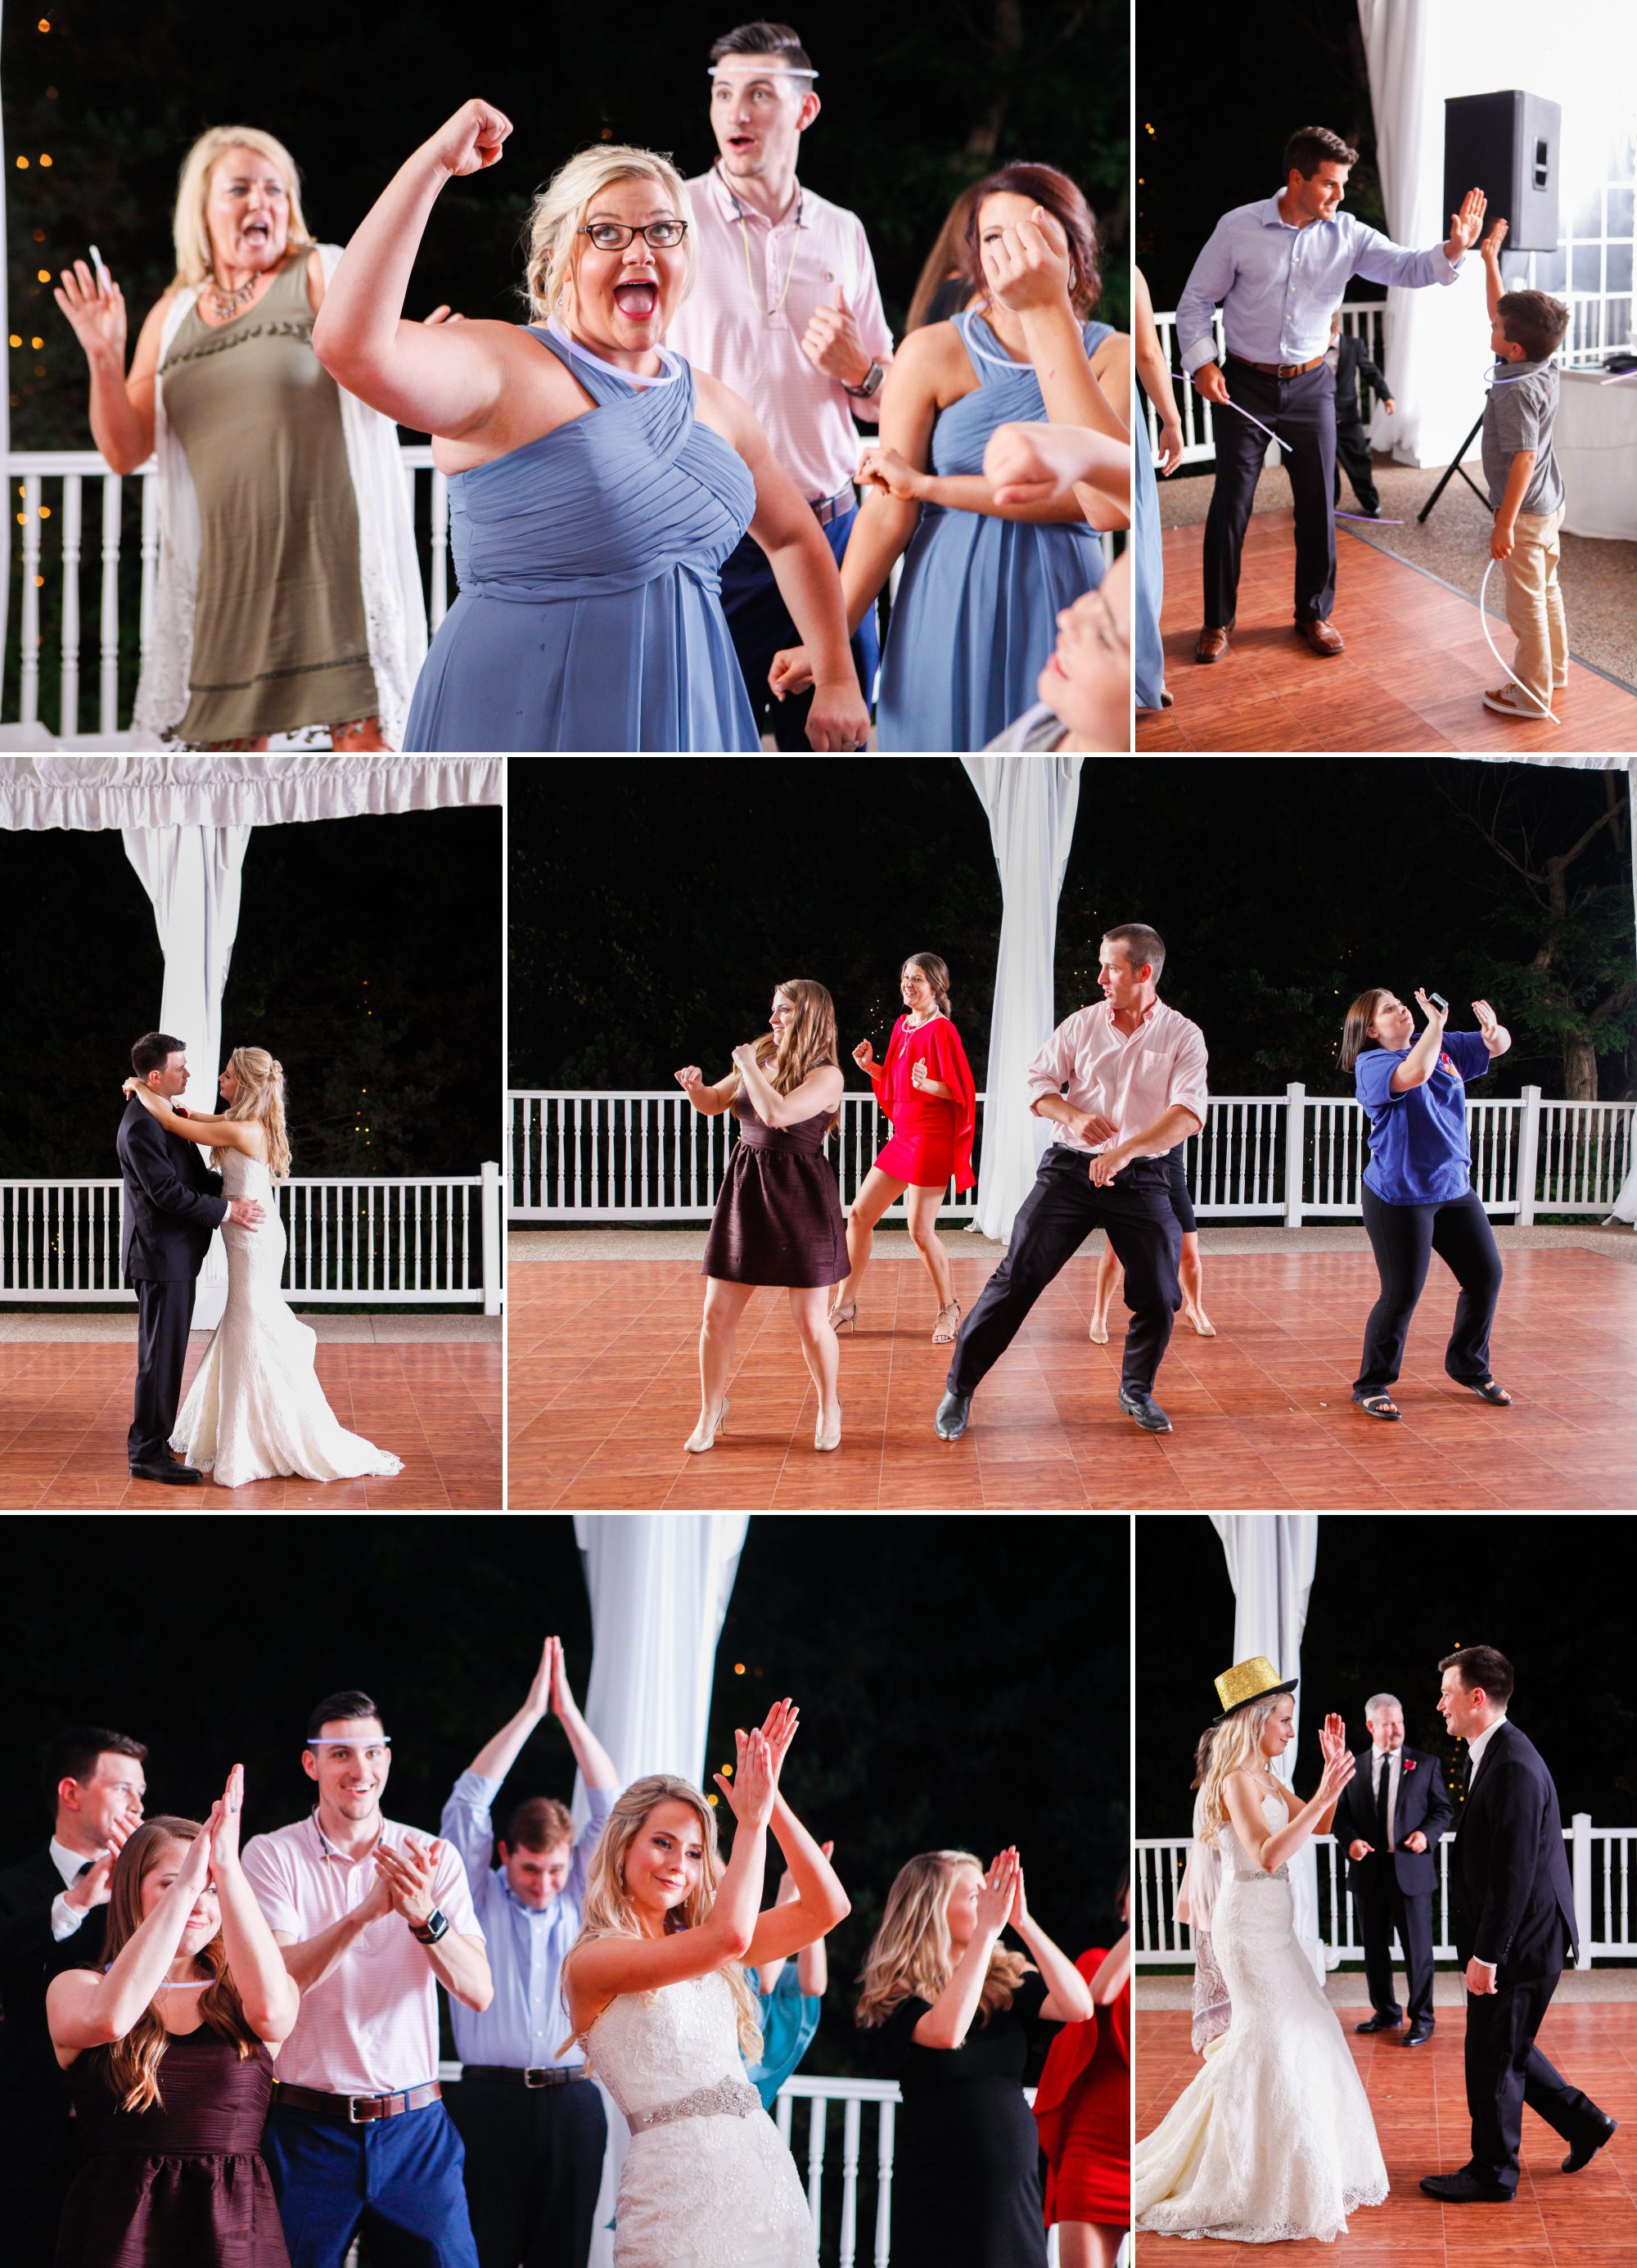 Guests dance at wedding reception at Riverwood Mansion in Nashville, Tennessee. Photography by Krista Lee.